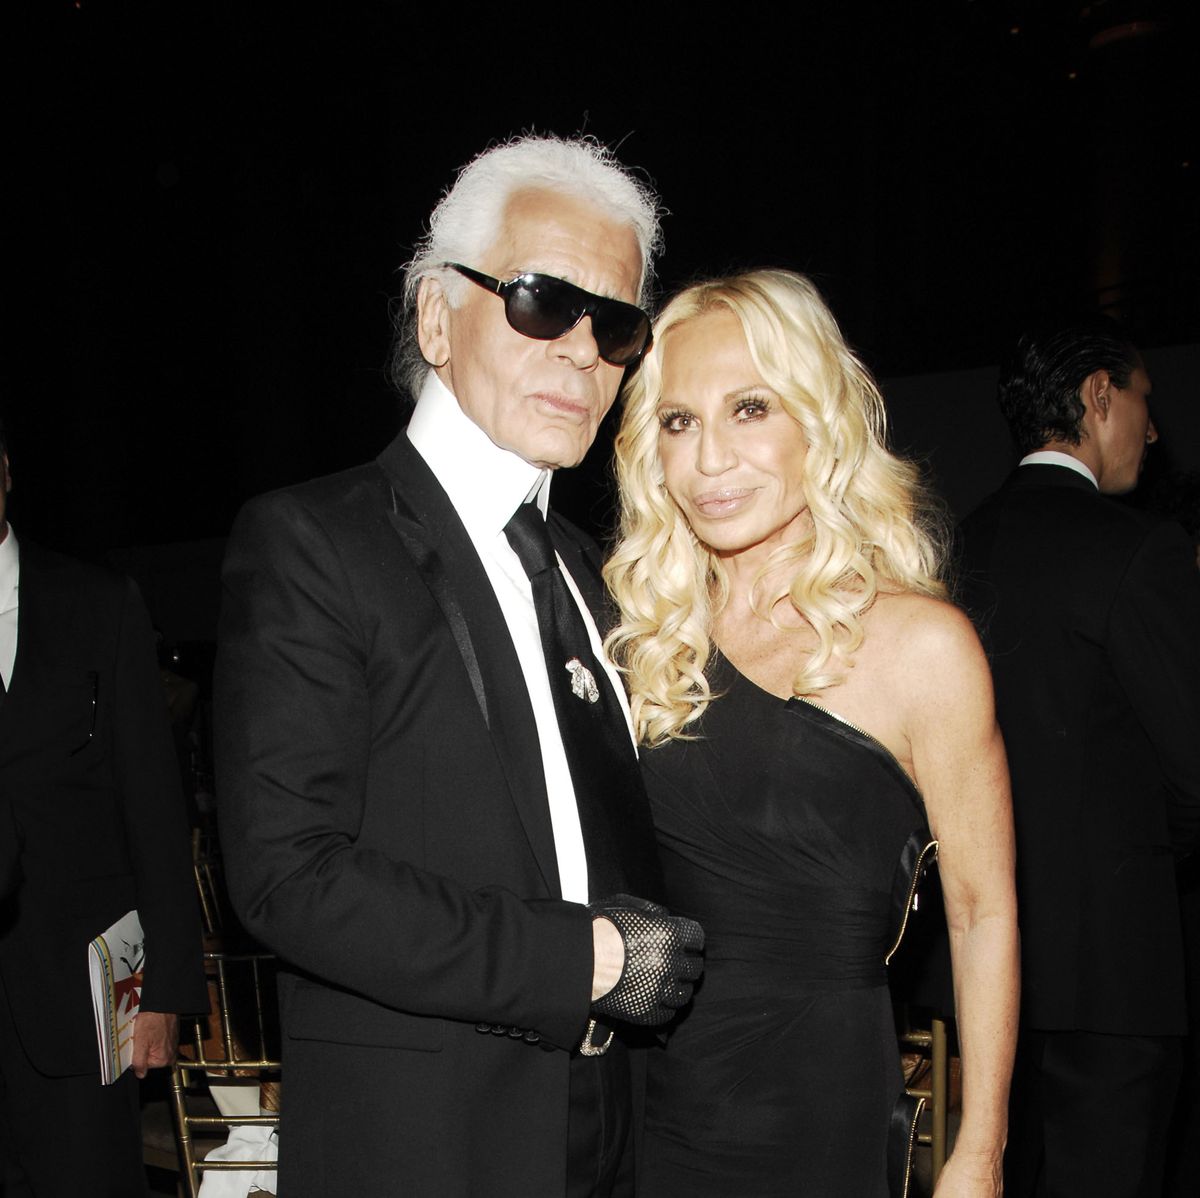 Models, Designers, and Celebrities Honor Karl Lagerfeld's Death